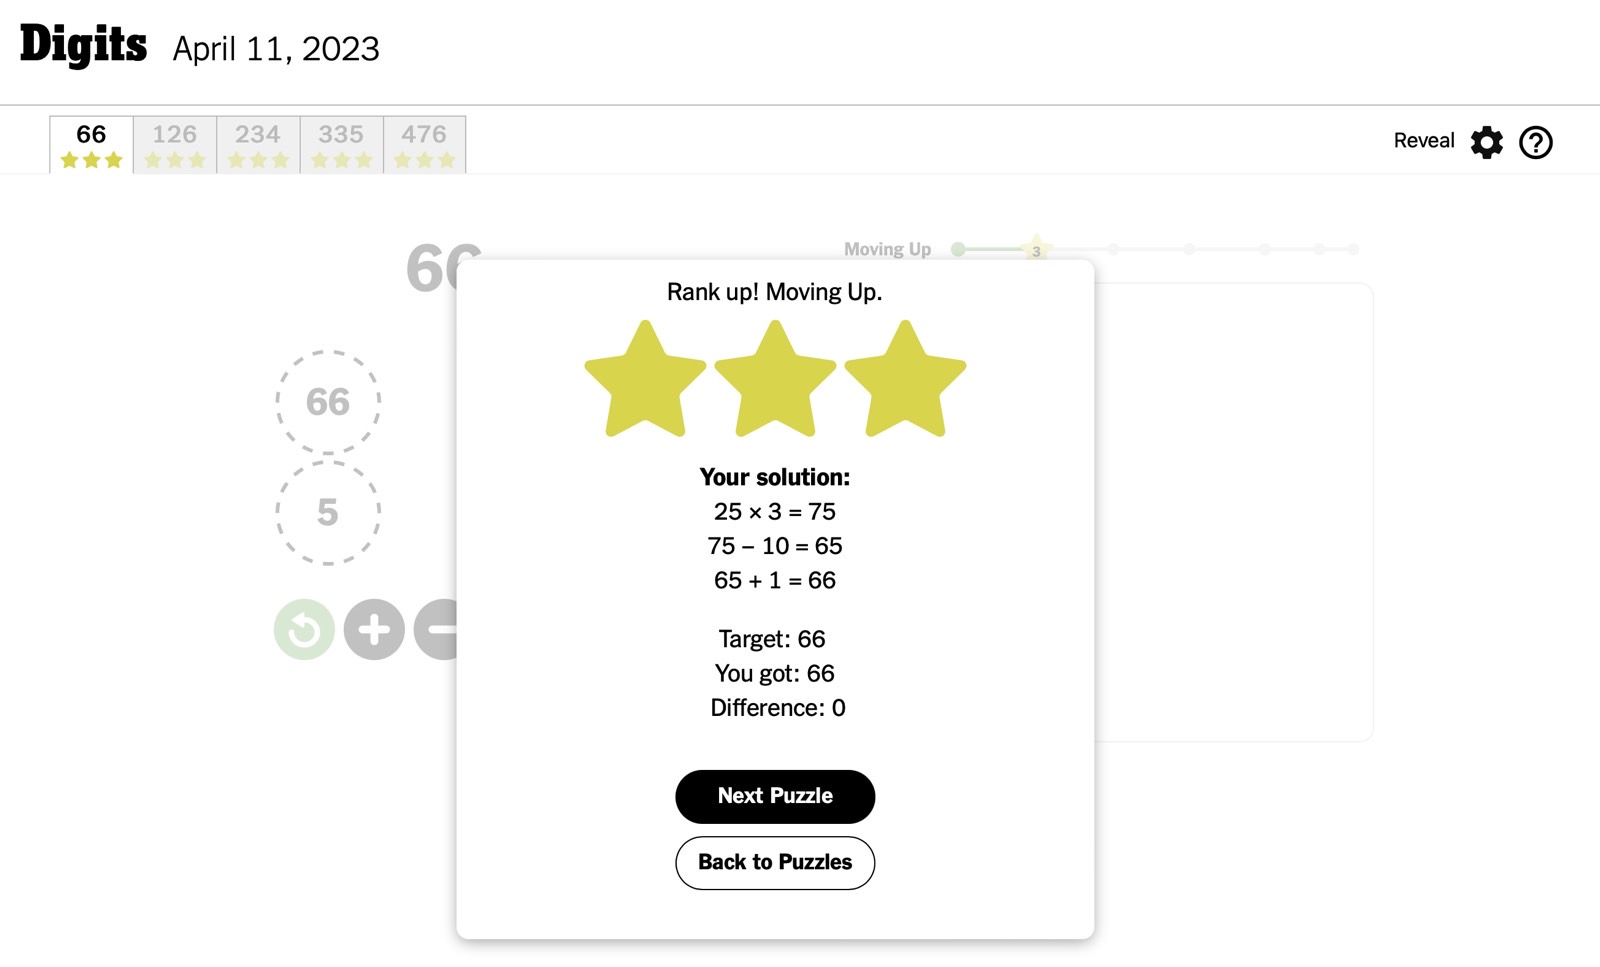 The New York Times' Digits: You get three stars if you find the correct solution.